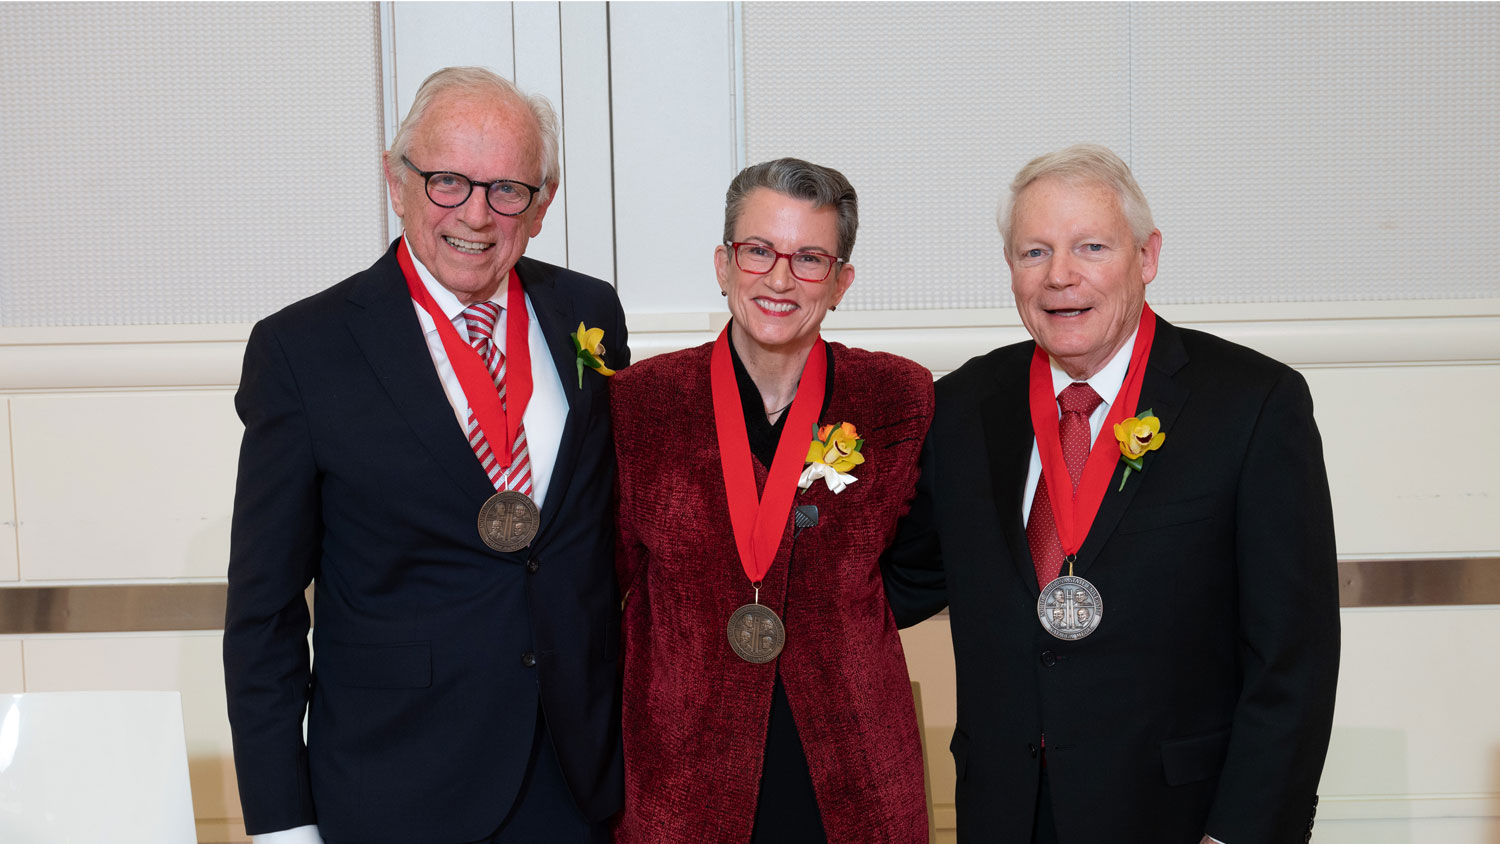 Brenda Brickhouse, Bill Culpepper and Jerry Jackson - 2022 Watauga Medal Ceremony Recognizes Three Extraordinary Pack Members - College of Natural Resources News NC State University